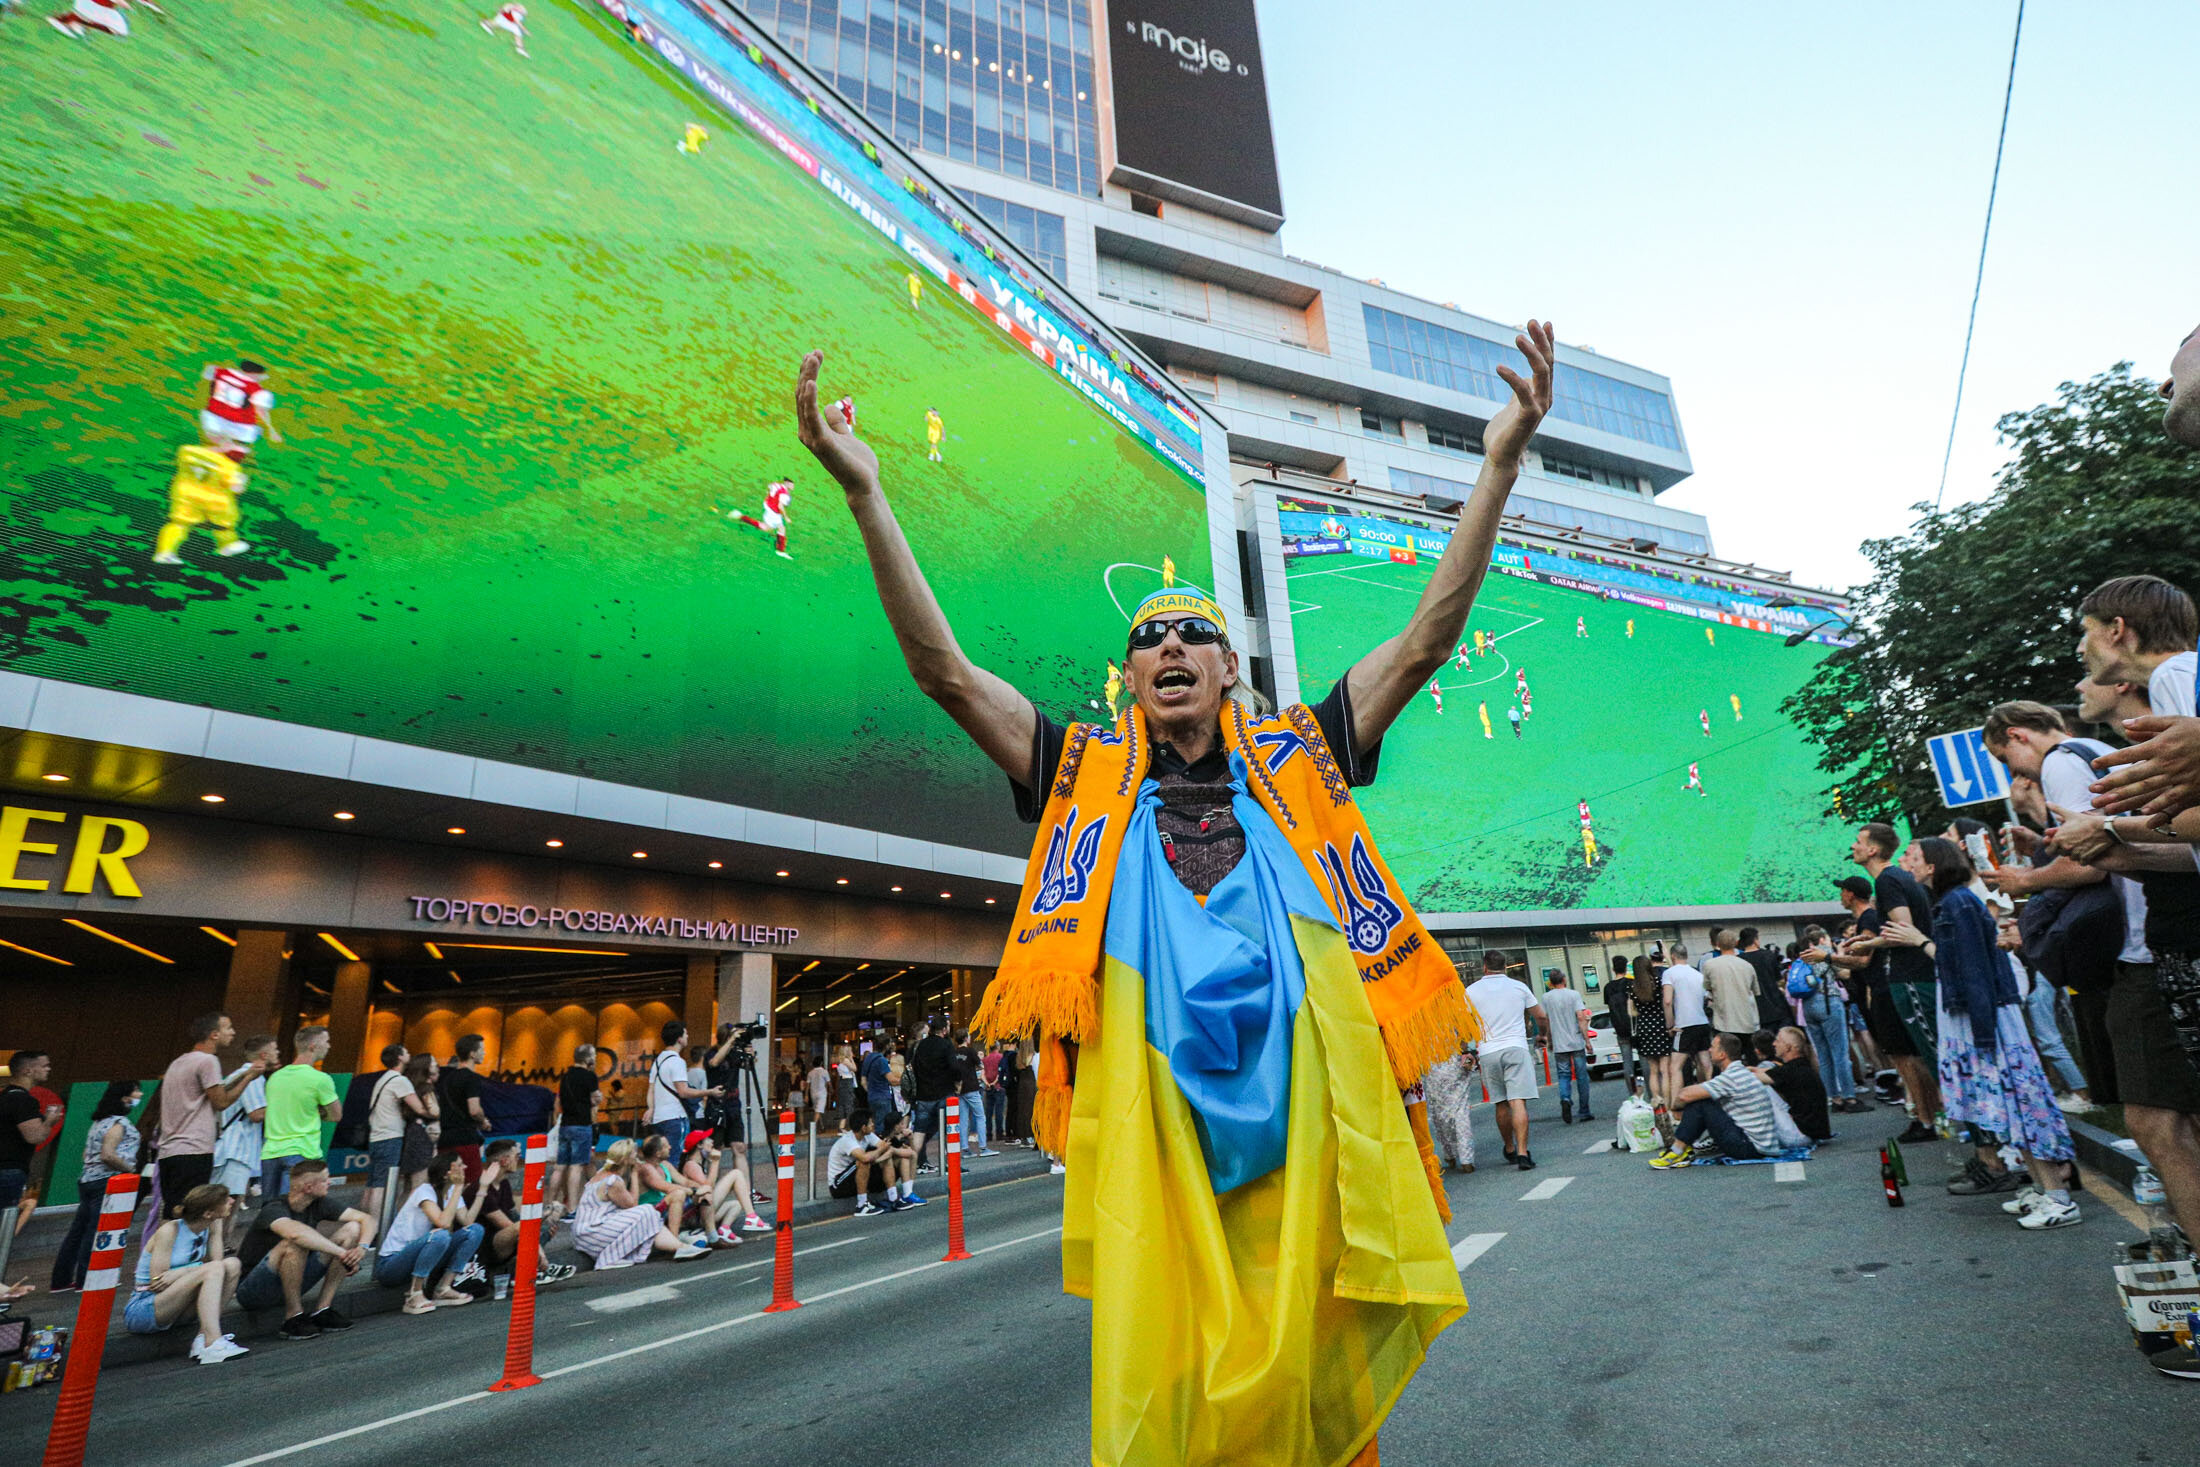 Ukrainian supporter reacts during the UEFA EURO 2020 Group C football match between Ukraine and Austria showing on a giant screen in the center of Kyiv on June 21, 2021.